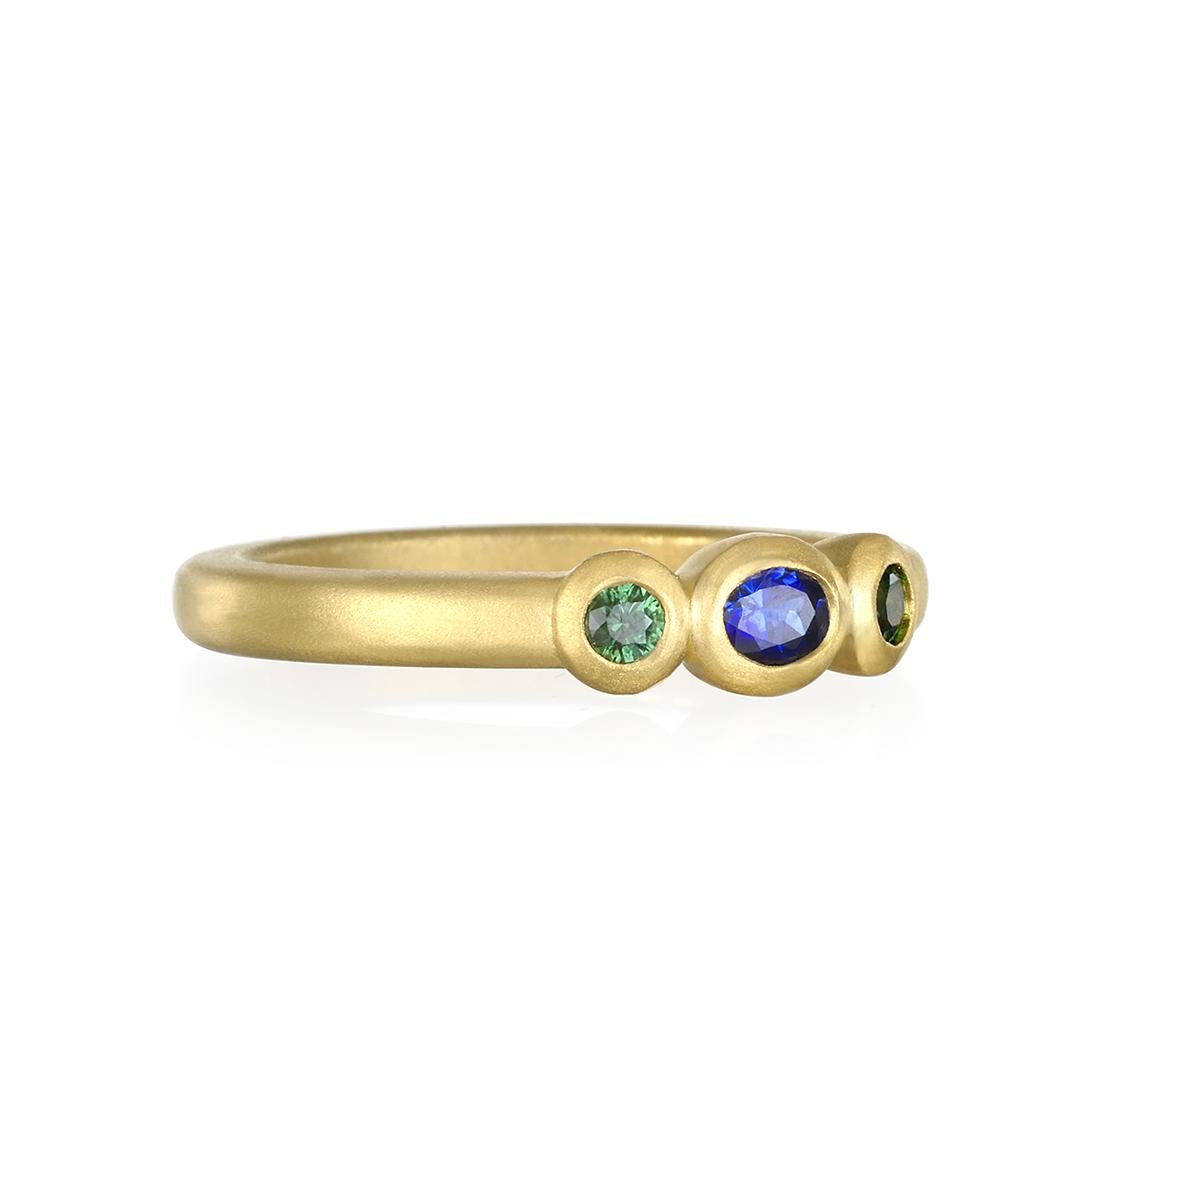 A vibrant oval shaped blue sapphire stone flanked by sparkling green sapphires. This three stone 18 karat gold Faye Kim ring is beautifully crafted, bezel set and matte-finished.  Wear alone or stacked with other rings to elevate your individual